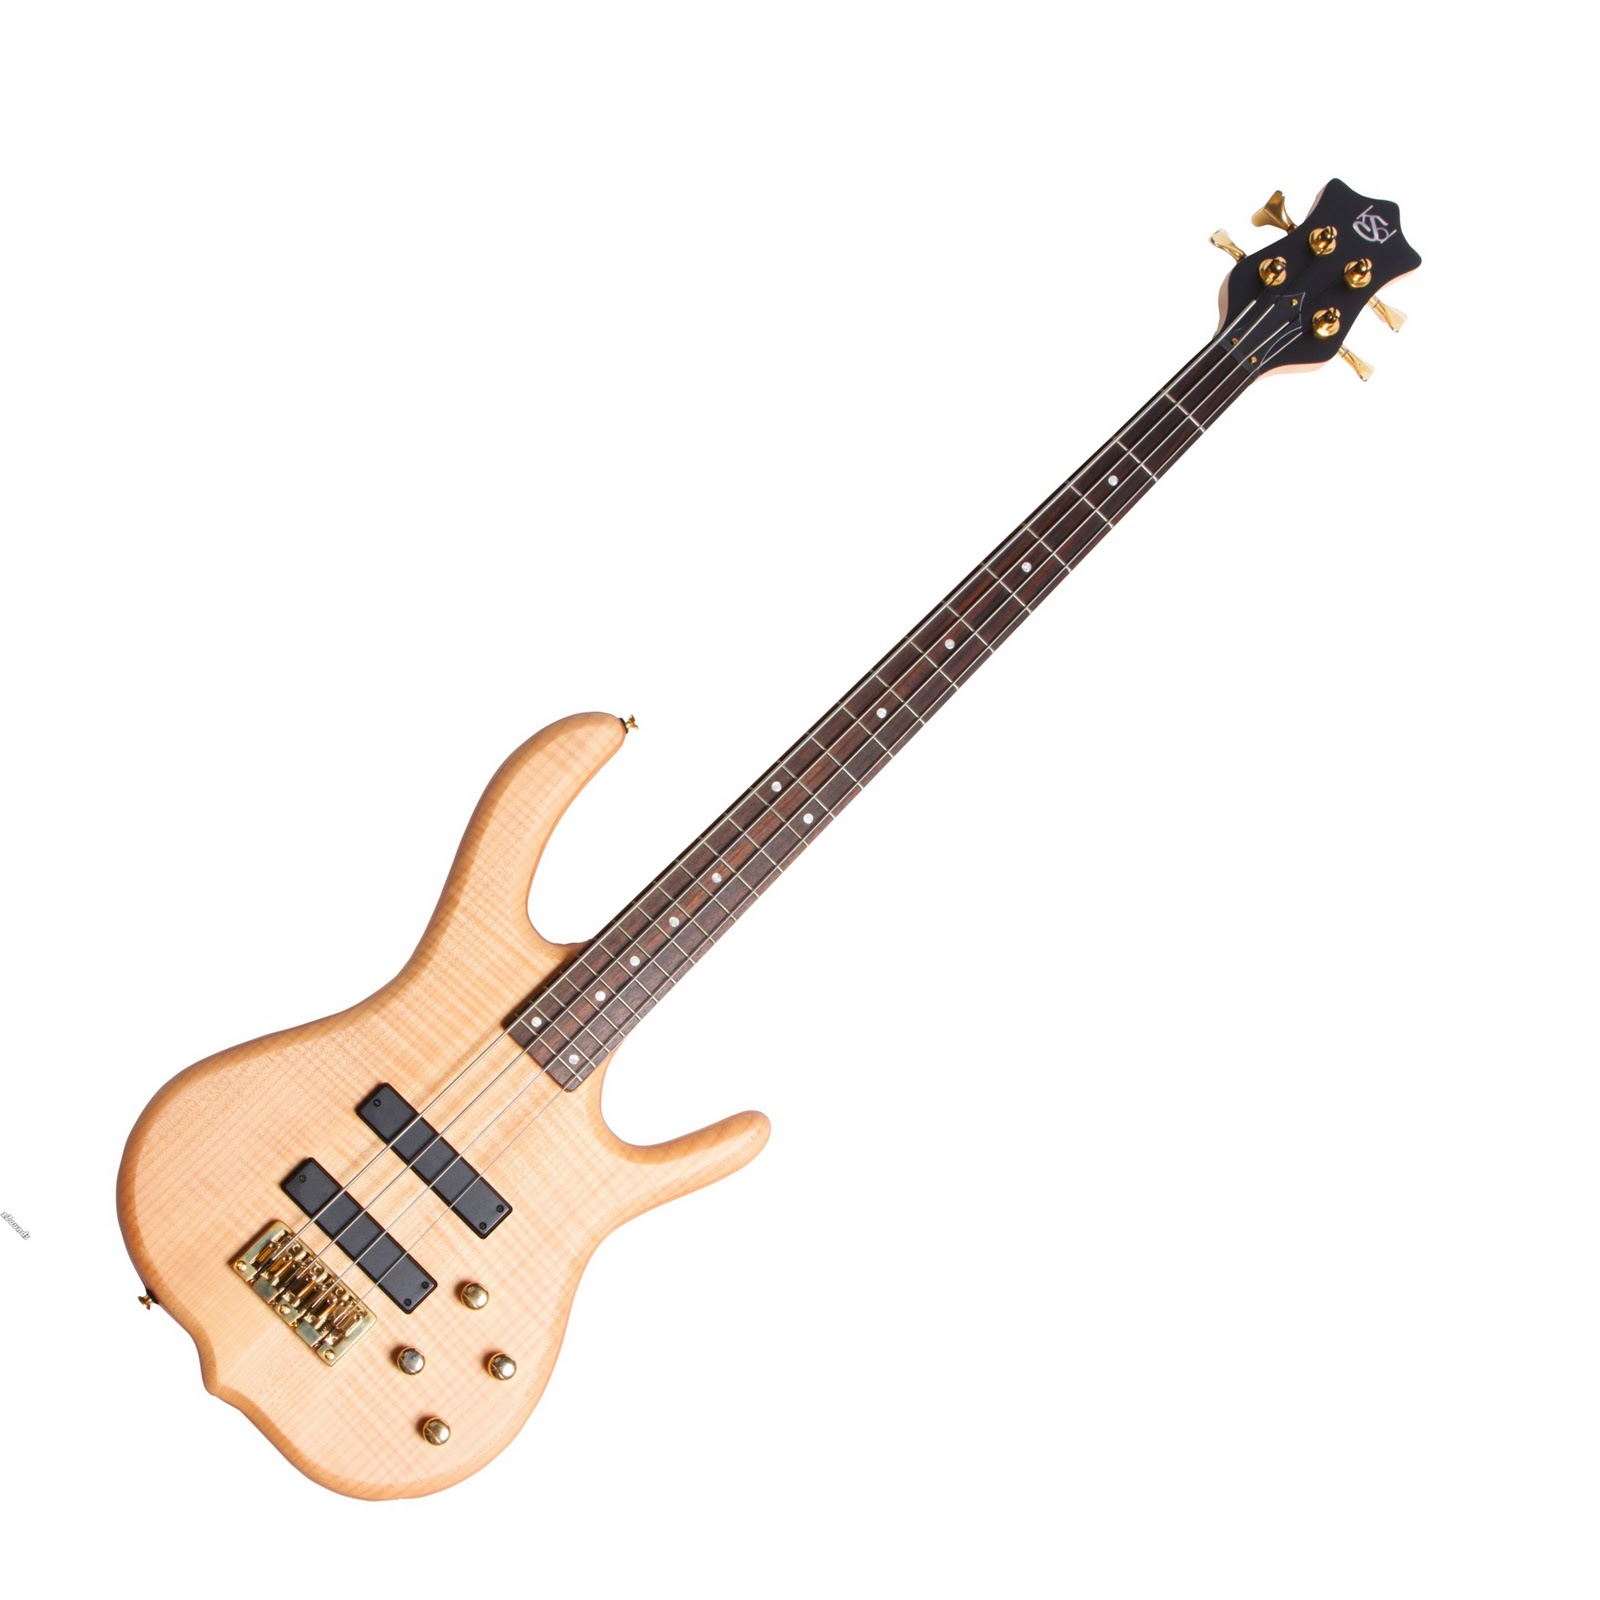 Bass Review - For Bassist : Ken Smith Design Burner Deluxe - 4 String Bass